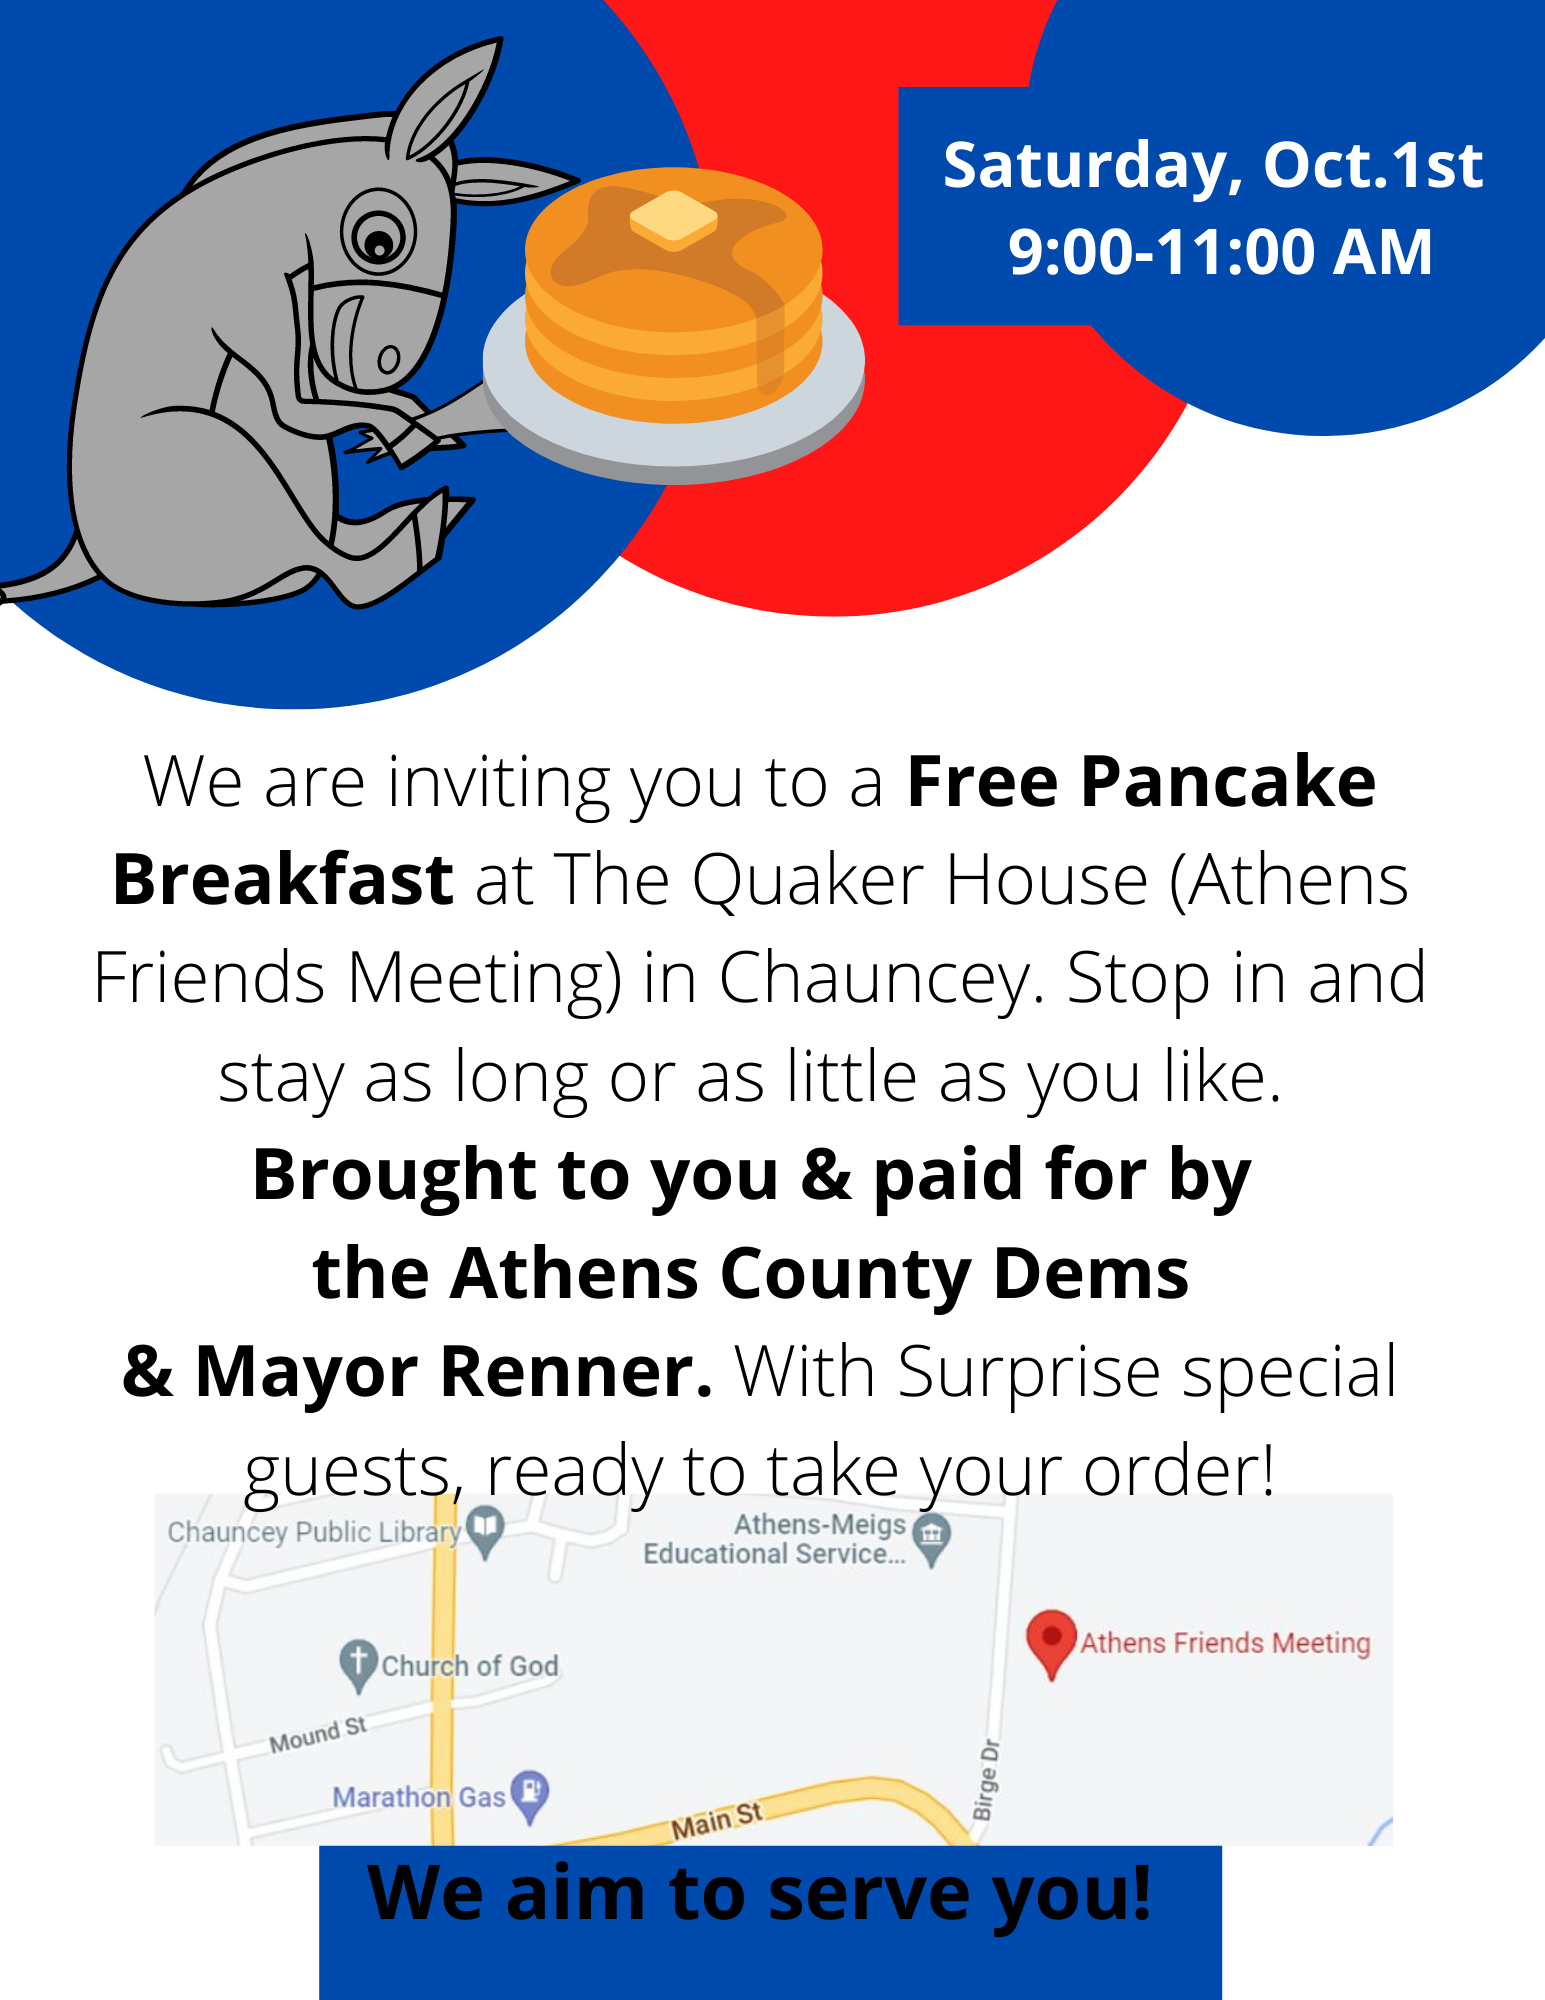 A flyer that reads: Saturday October 1 9 a.m. to 11 a.m. we are inviting you to a free pancake breakfast at the quaker house (athens Friends Meeting) in Chauncey. Stop in and stay as long or as little as you like Brought to you and paid for by the Athens County Dems and Mayor Renner with surprise special guests to take your order!